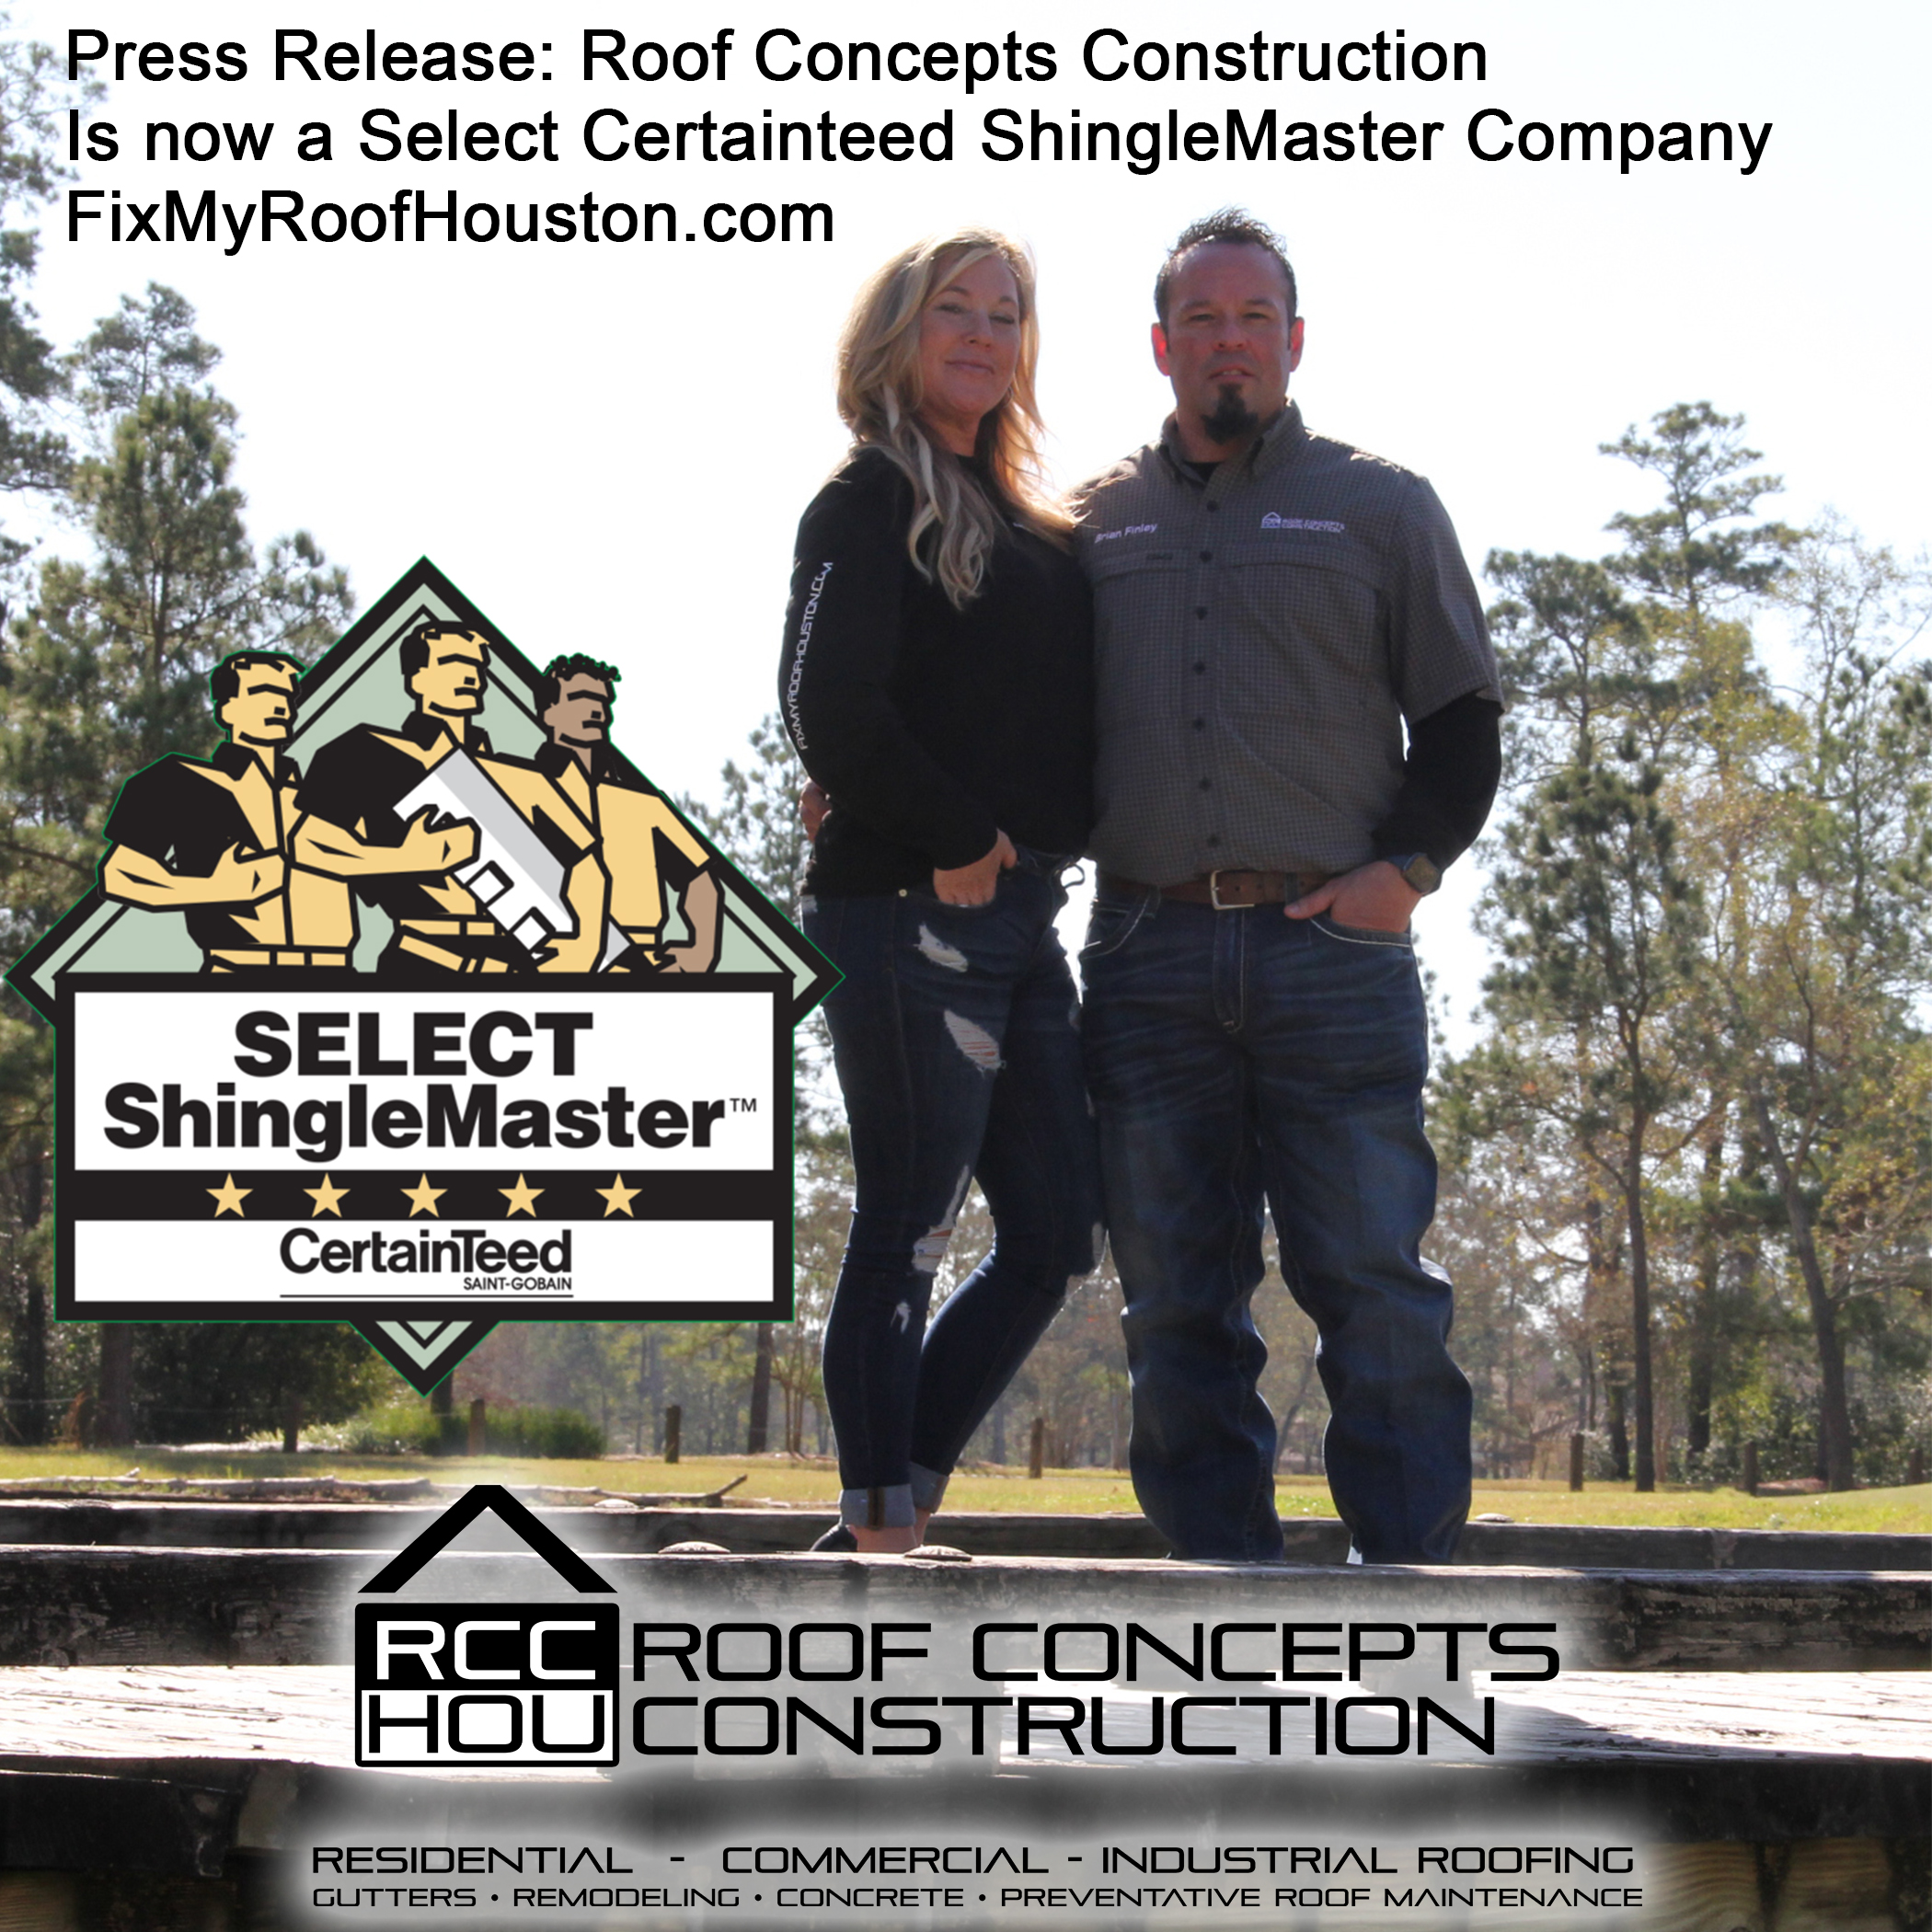 Press Release Roof Concepts Construction Is Now A Select Certainteed ShingleMaster Company FixMyRoofHouston.com